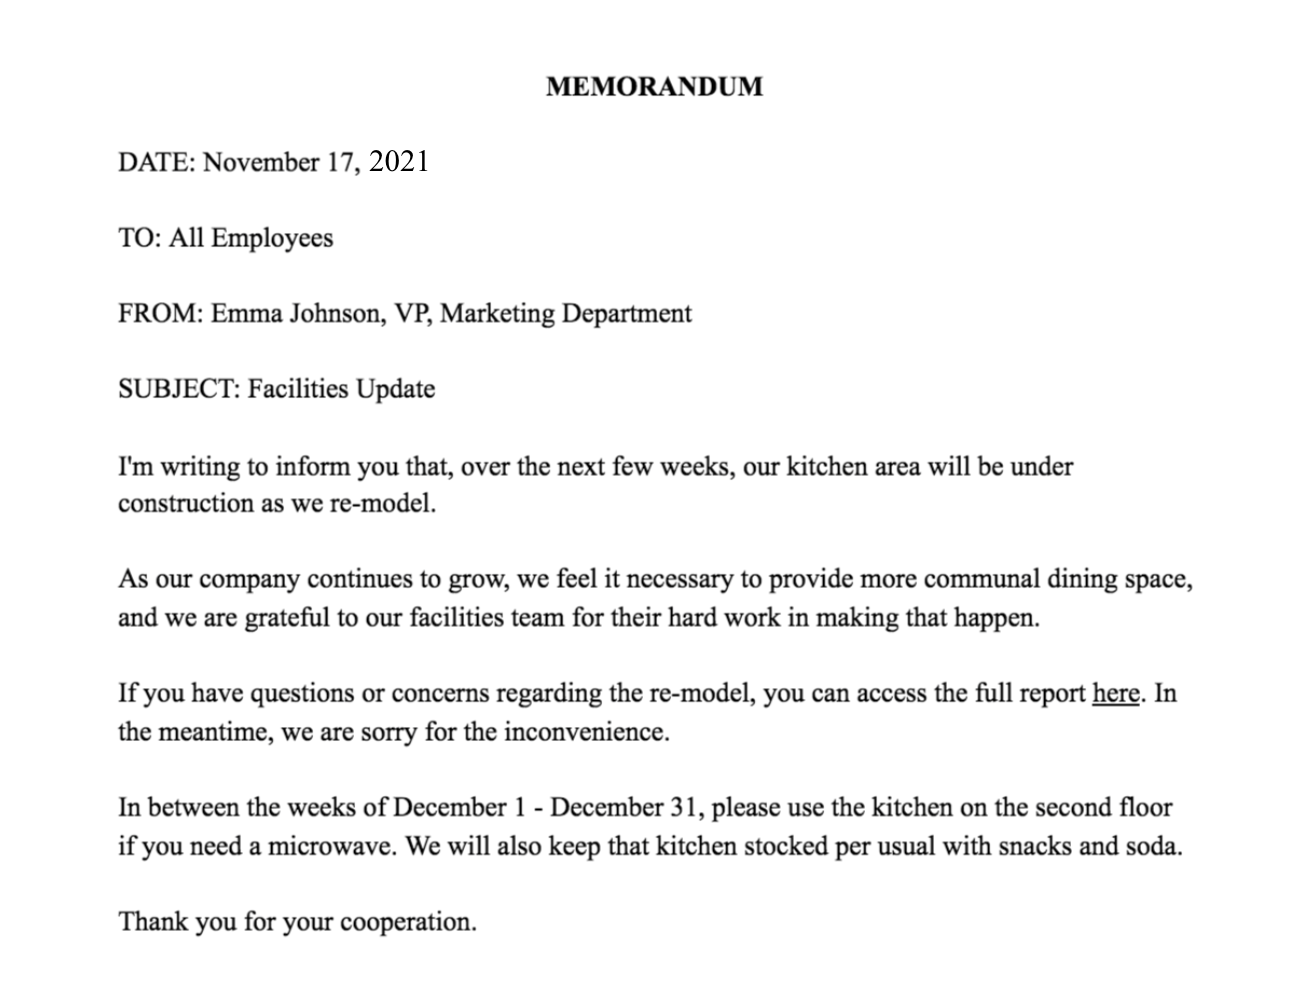 Business memo example for building update